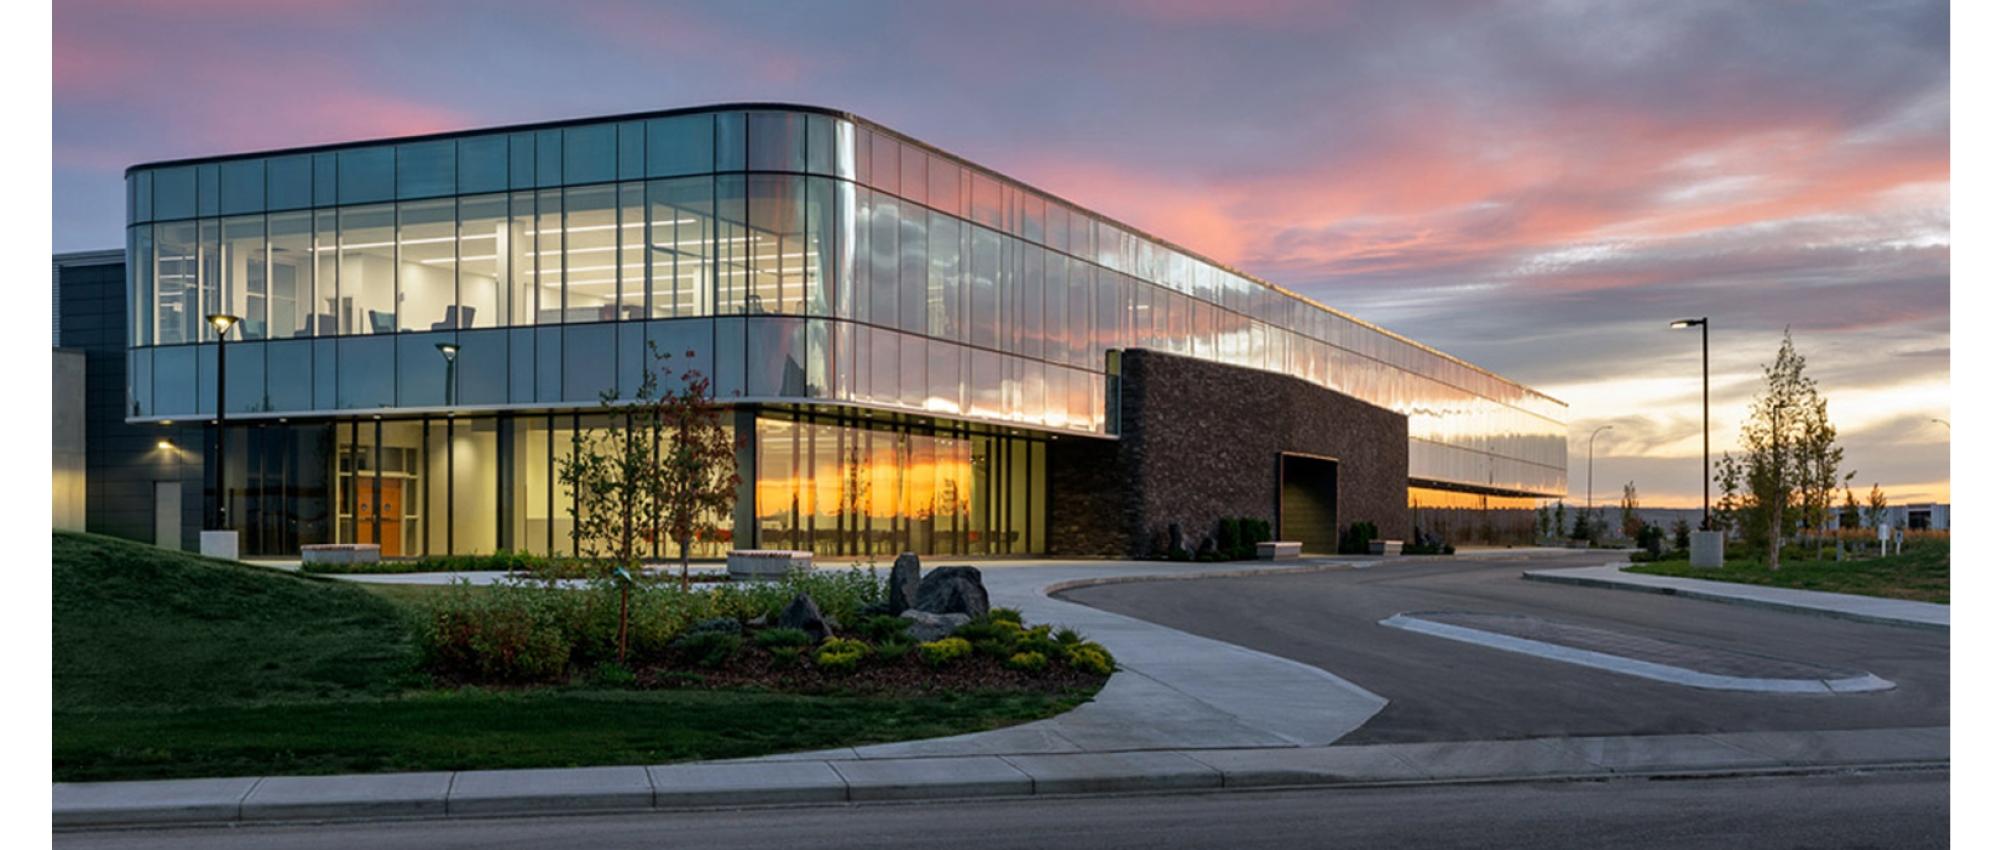 Featured image of the new Canadian Blood Services environmental sustainability Calgary operations facility.